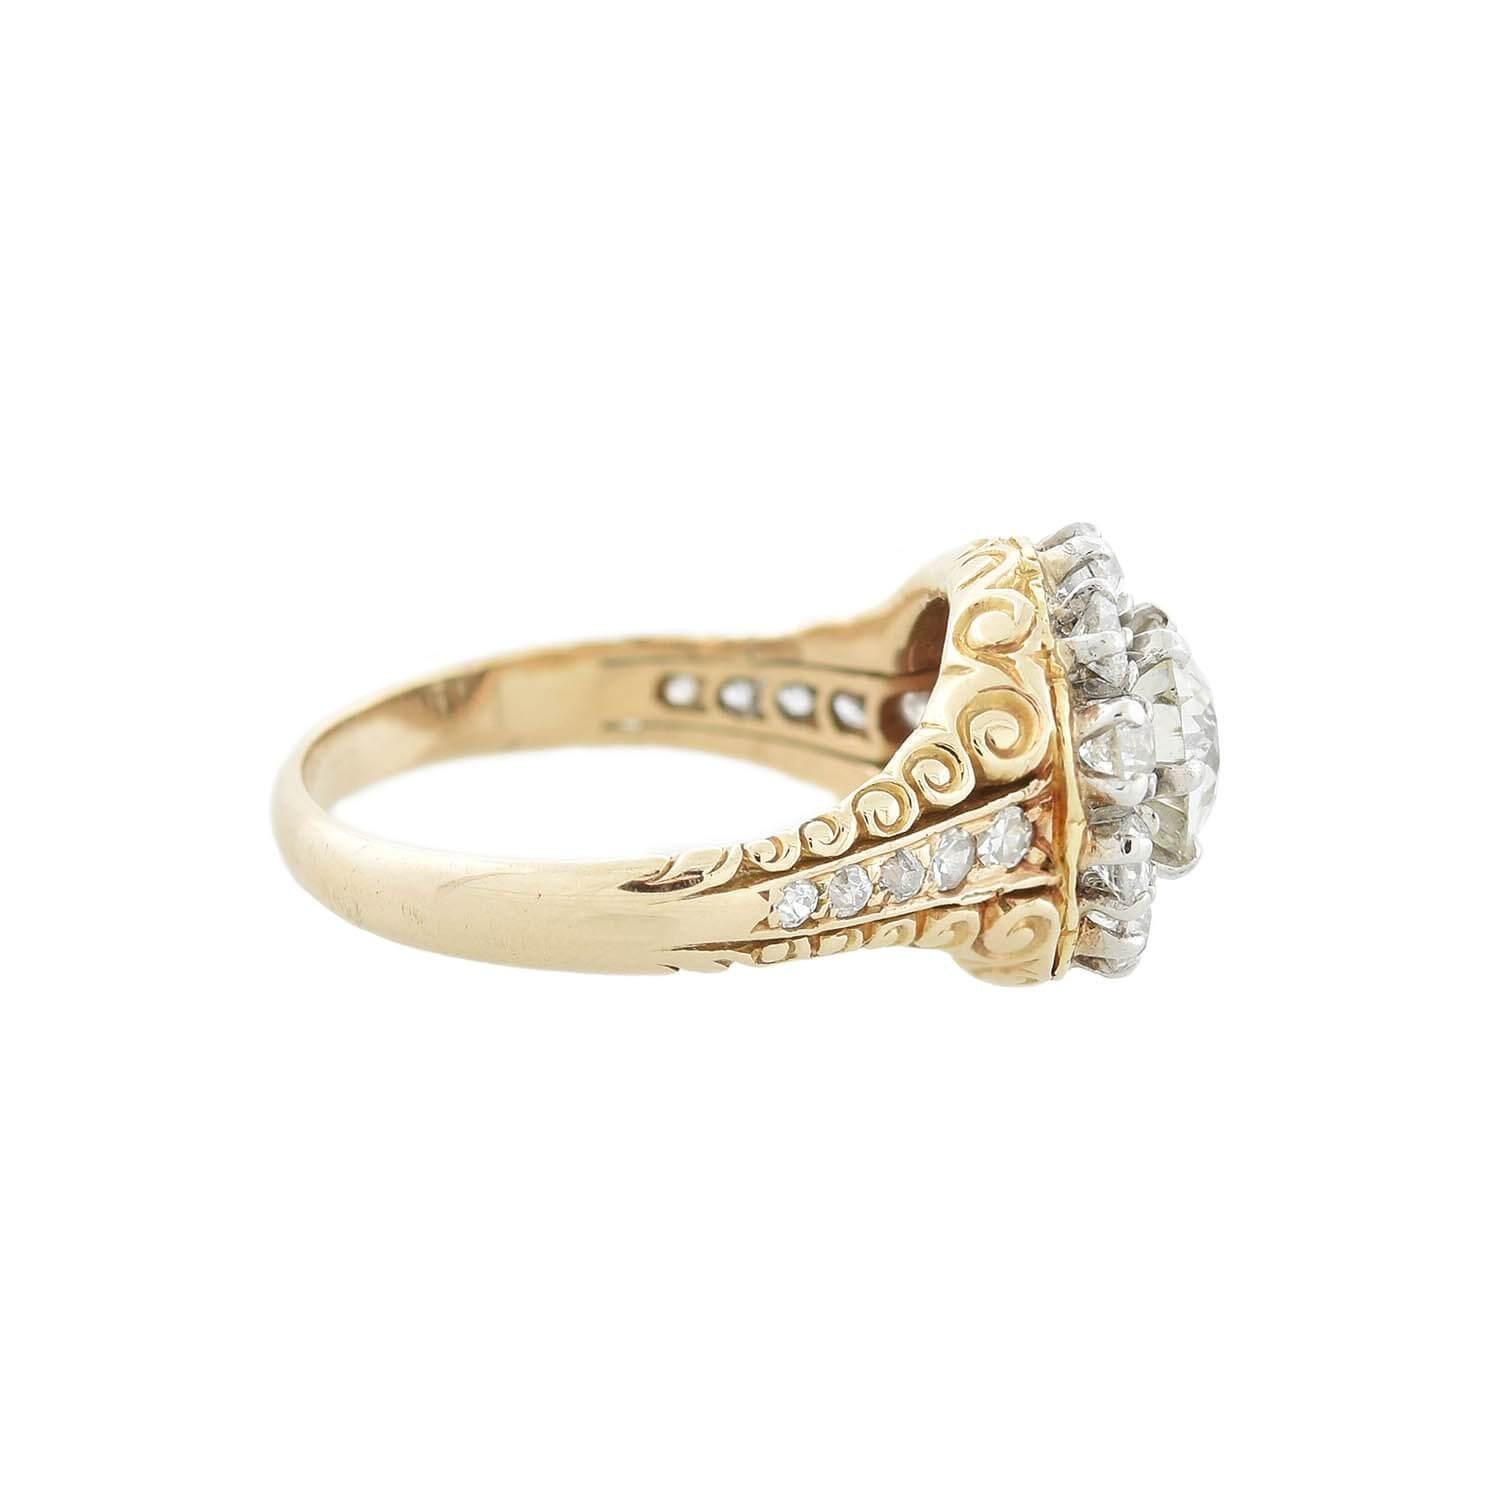 A gorgeous diamond cluster ring from the Victorian (ca1890s) era! This exquisite ring is made of vibrant 18kt yellow gold topped in sterling silver. A sparkling 0.95ctw Old European Cut diamond of H/I color and VS1-VS2 clarity is surrounded by ten